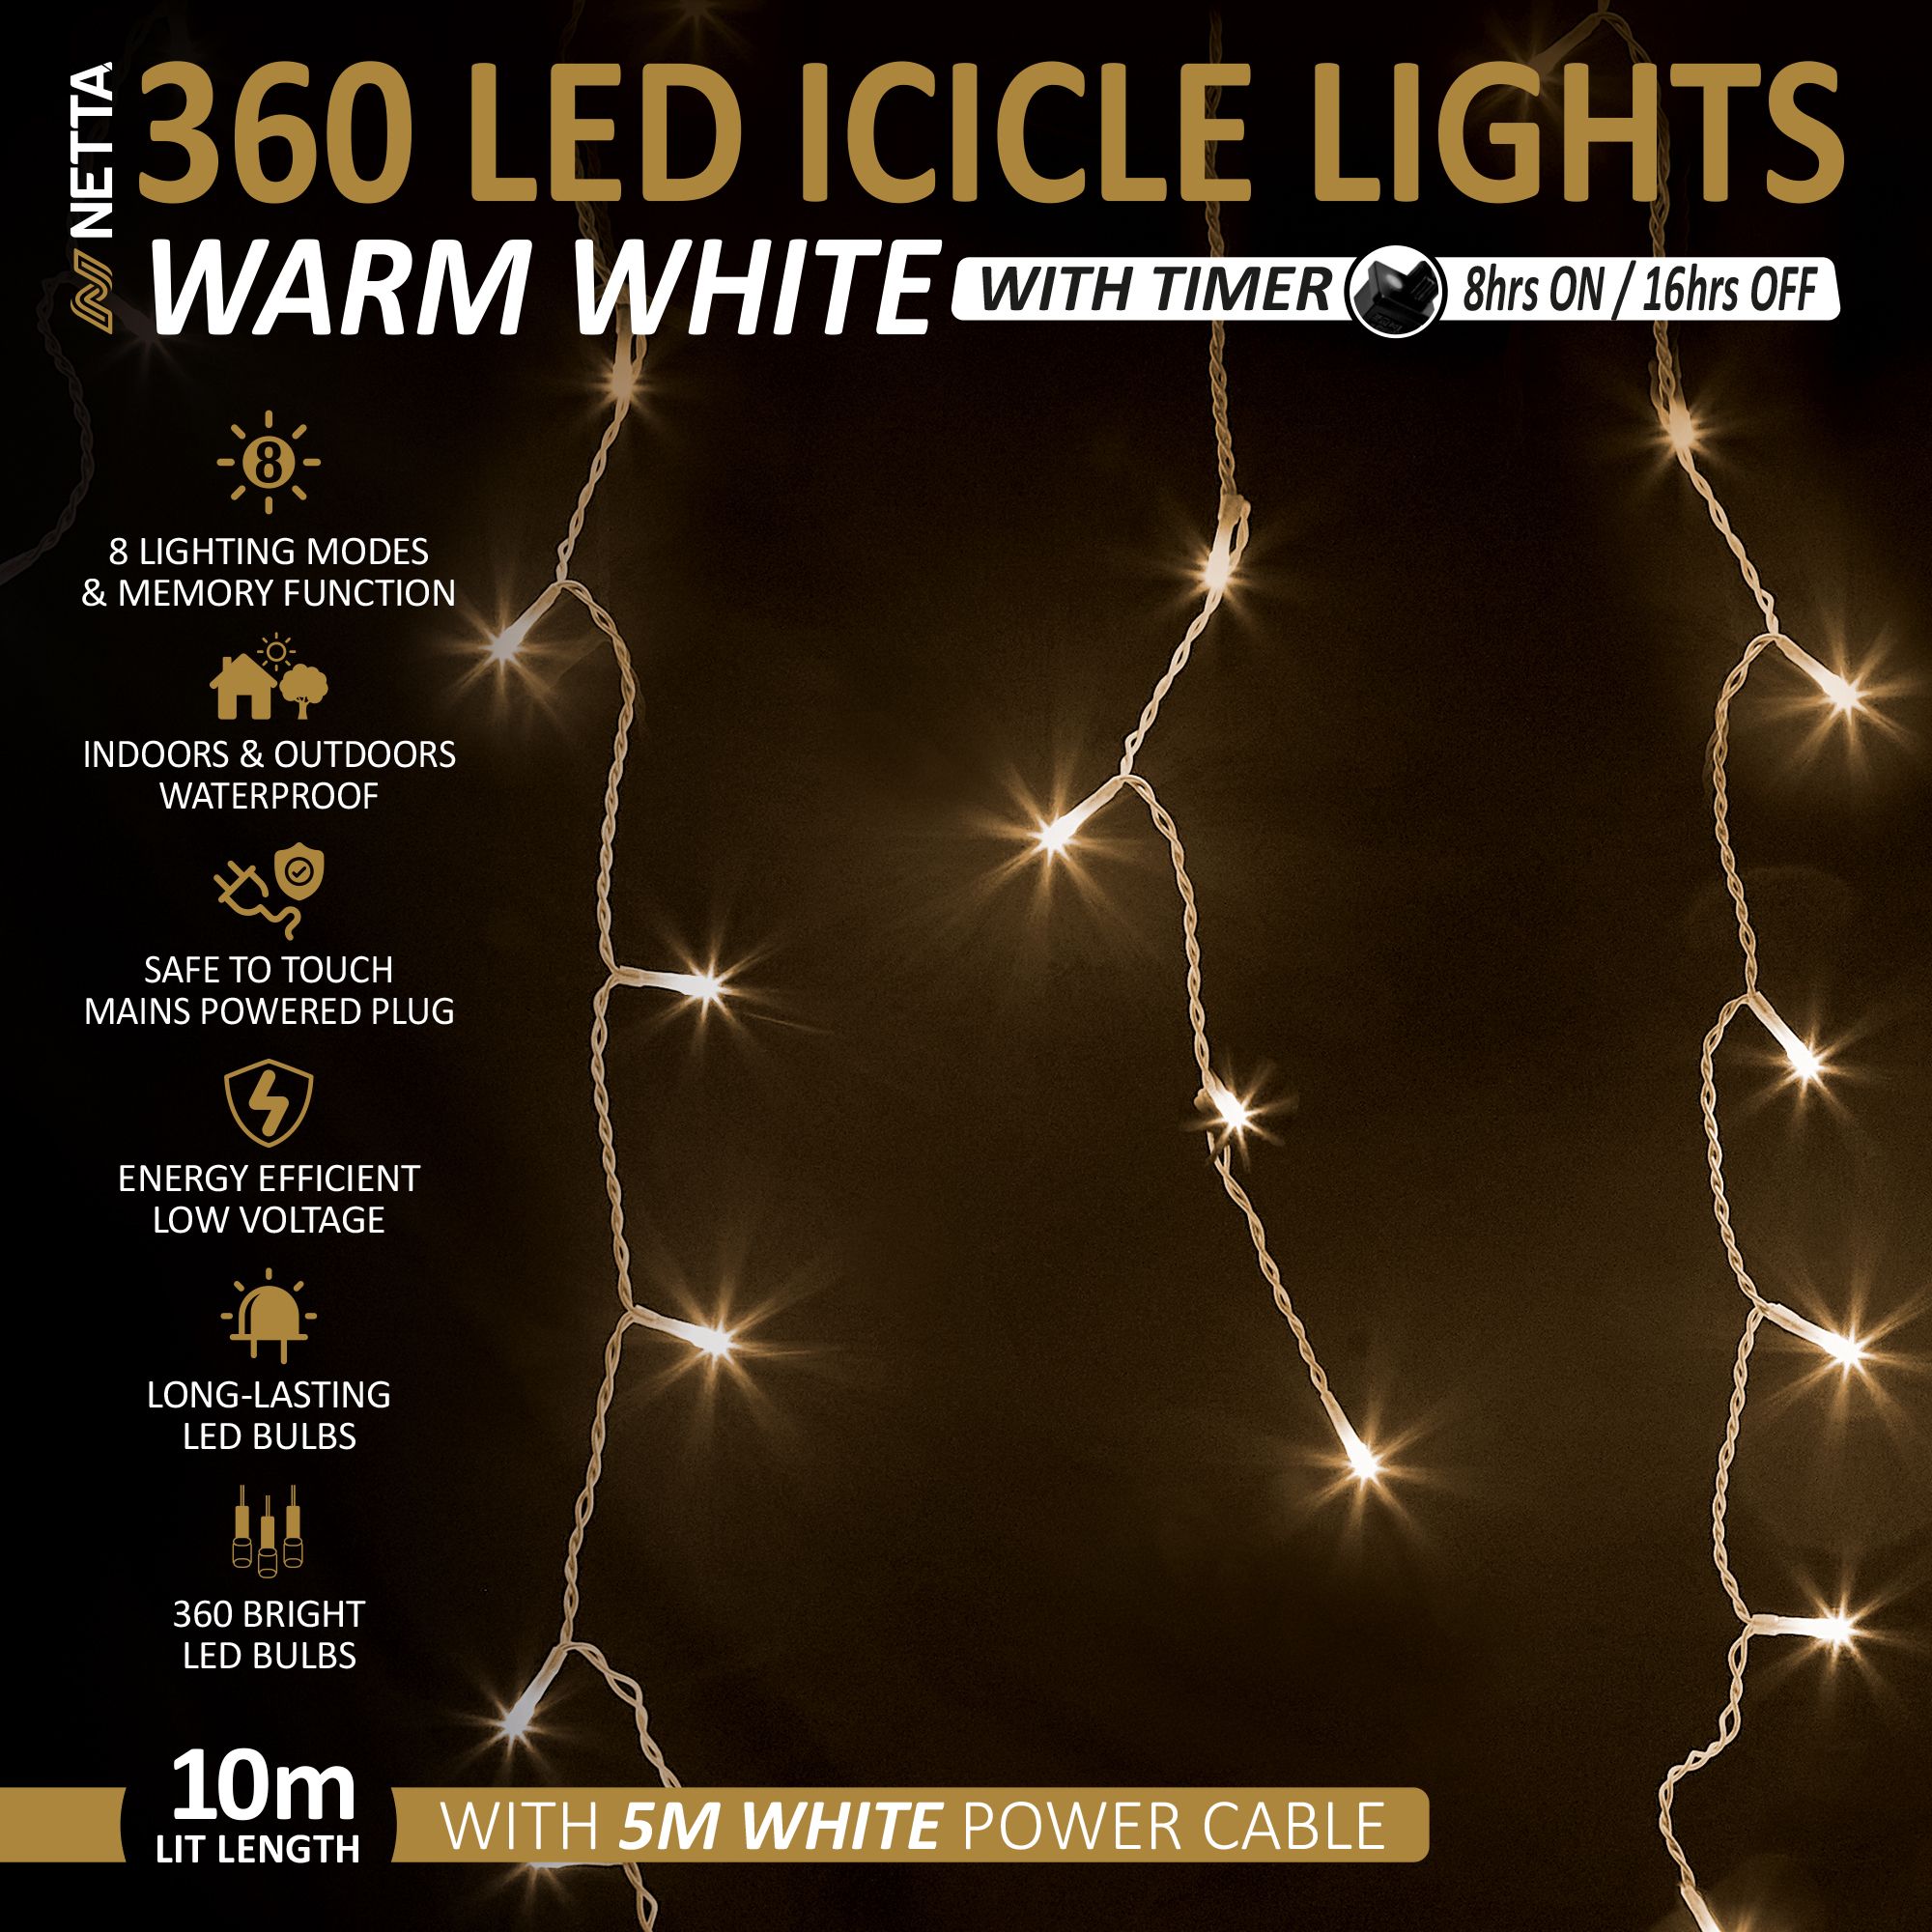 NETTA 360 LED Icicle Lights Outdoor Christmas Lights 10M Lit Length, Timer - Warm White, with White Cable